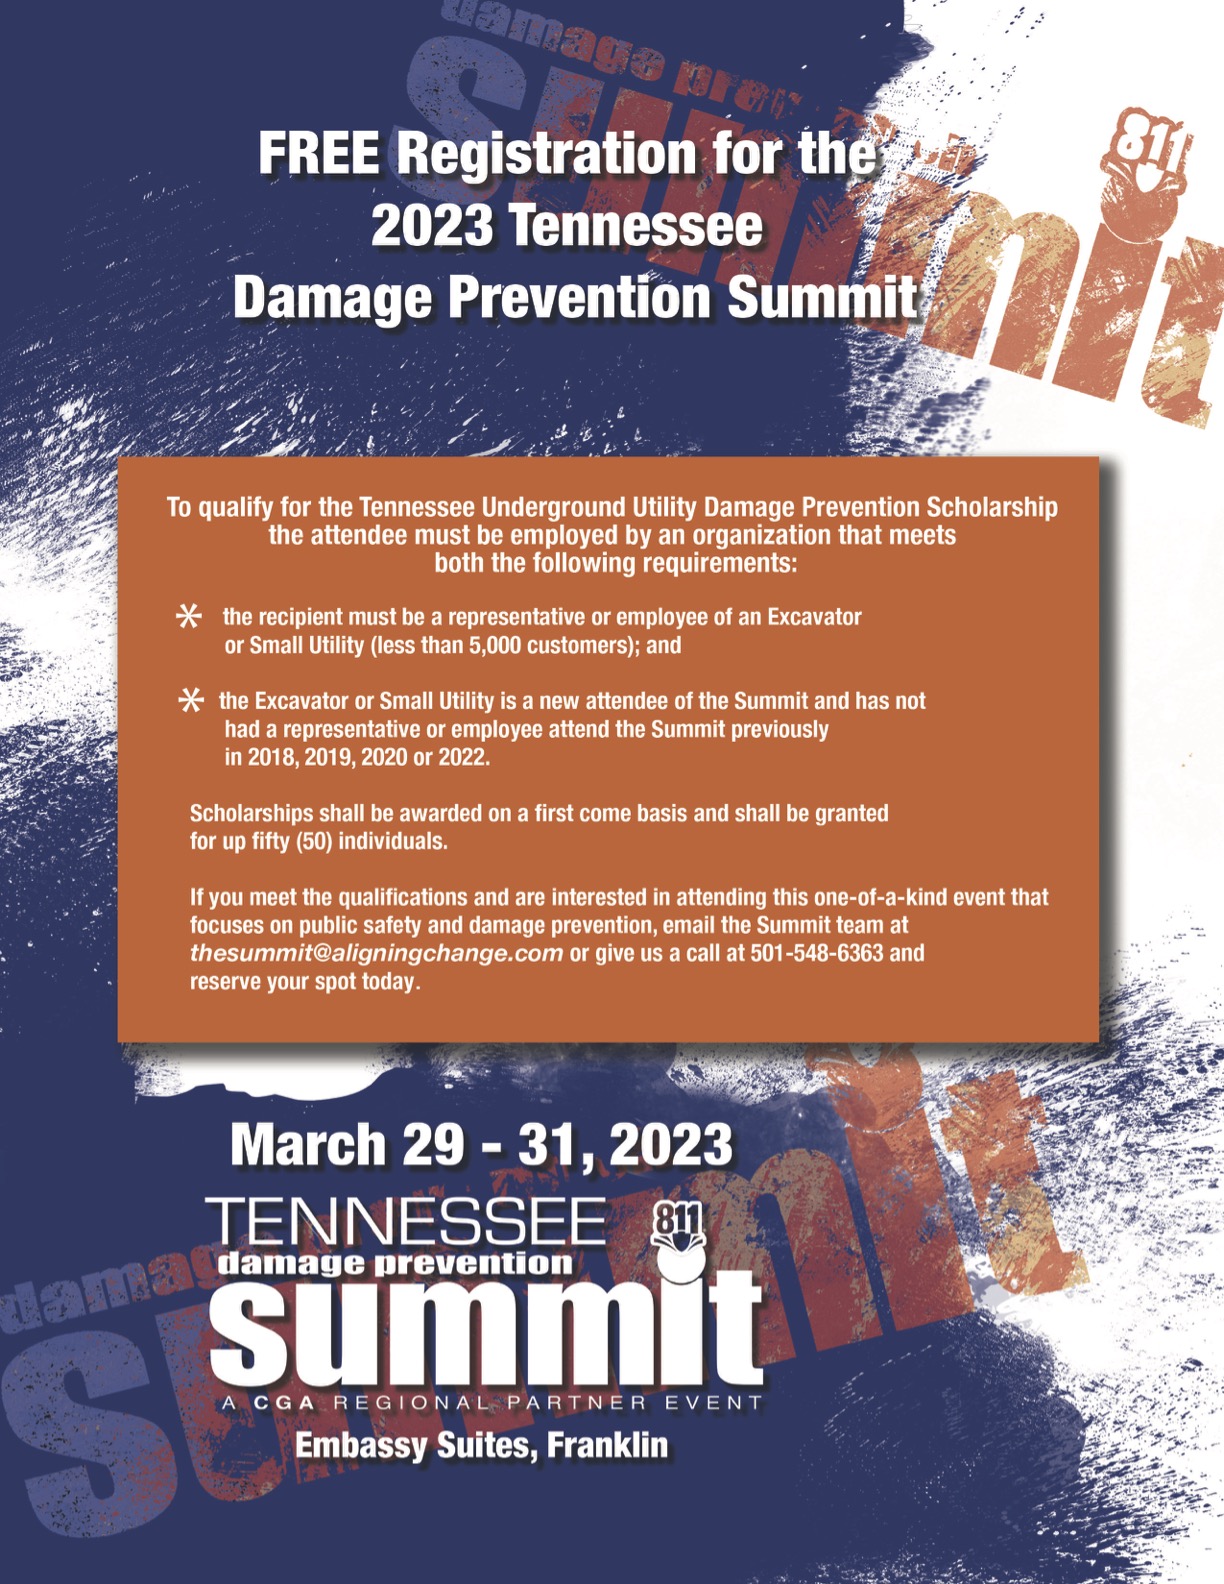 TN811 Damage Prevention Summit – Tennessee Association of Utility Districts